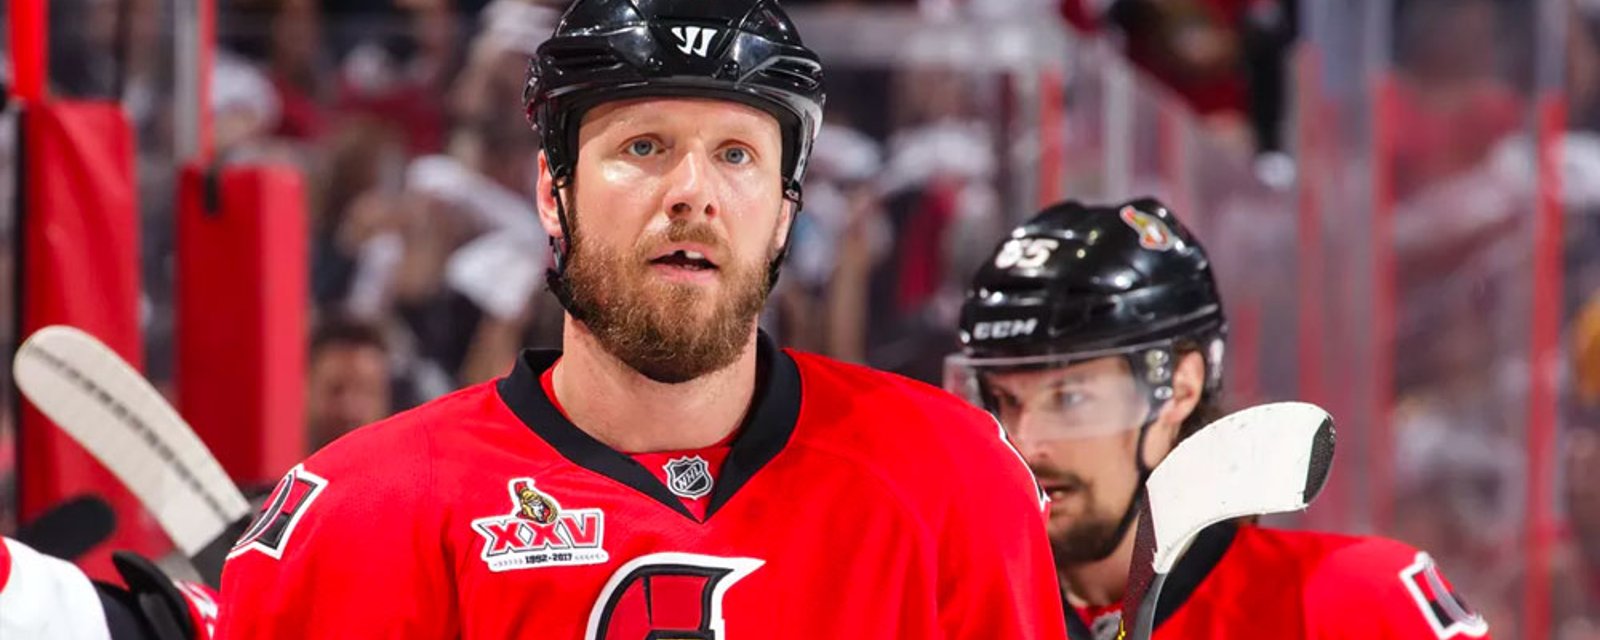 Veteran Methot reportedly forced to retire due to injuries 